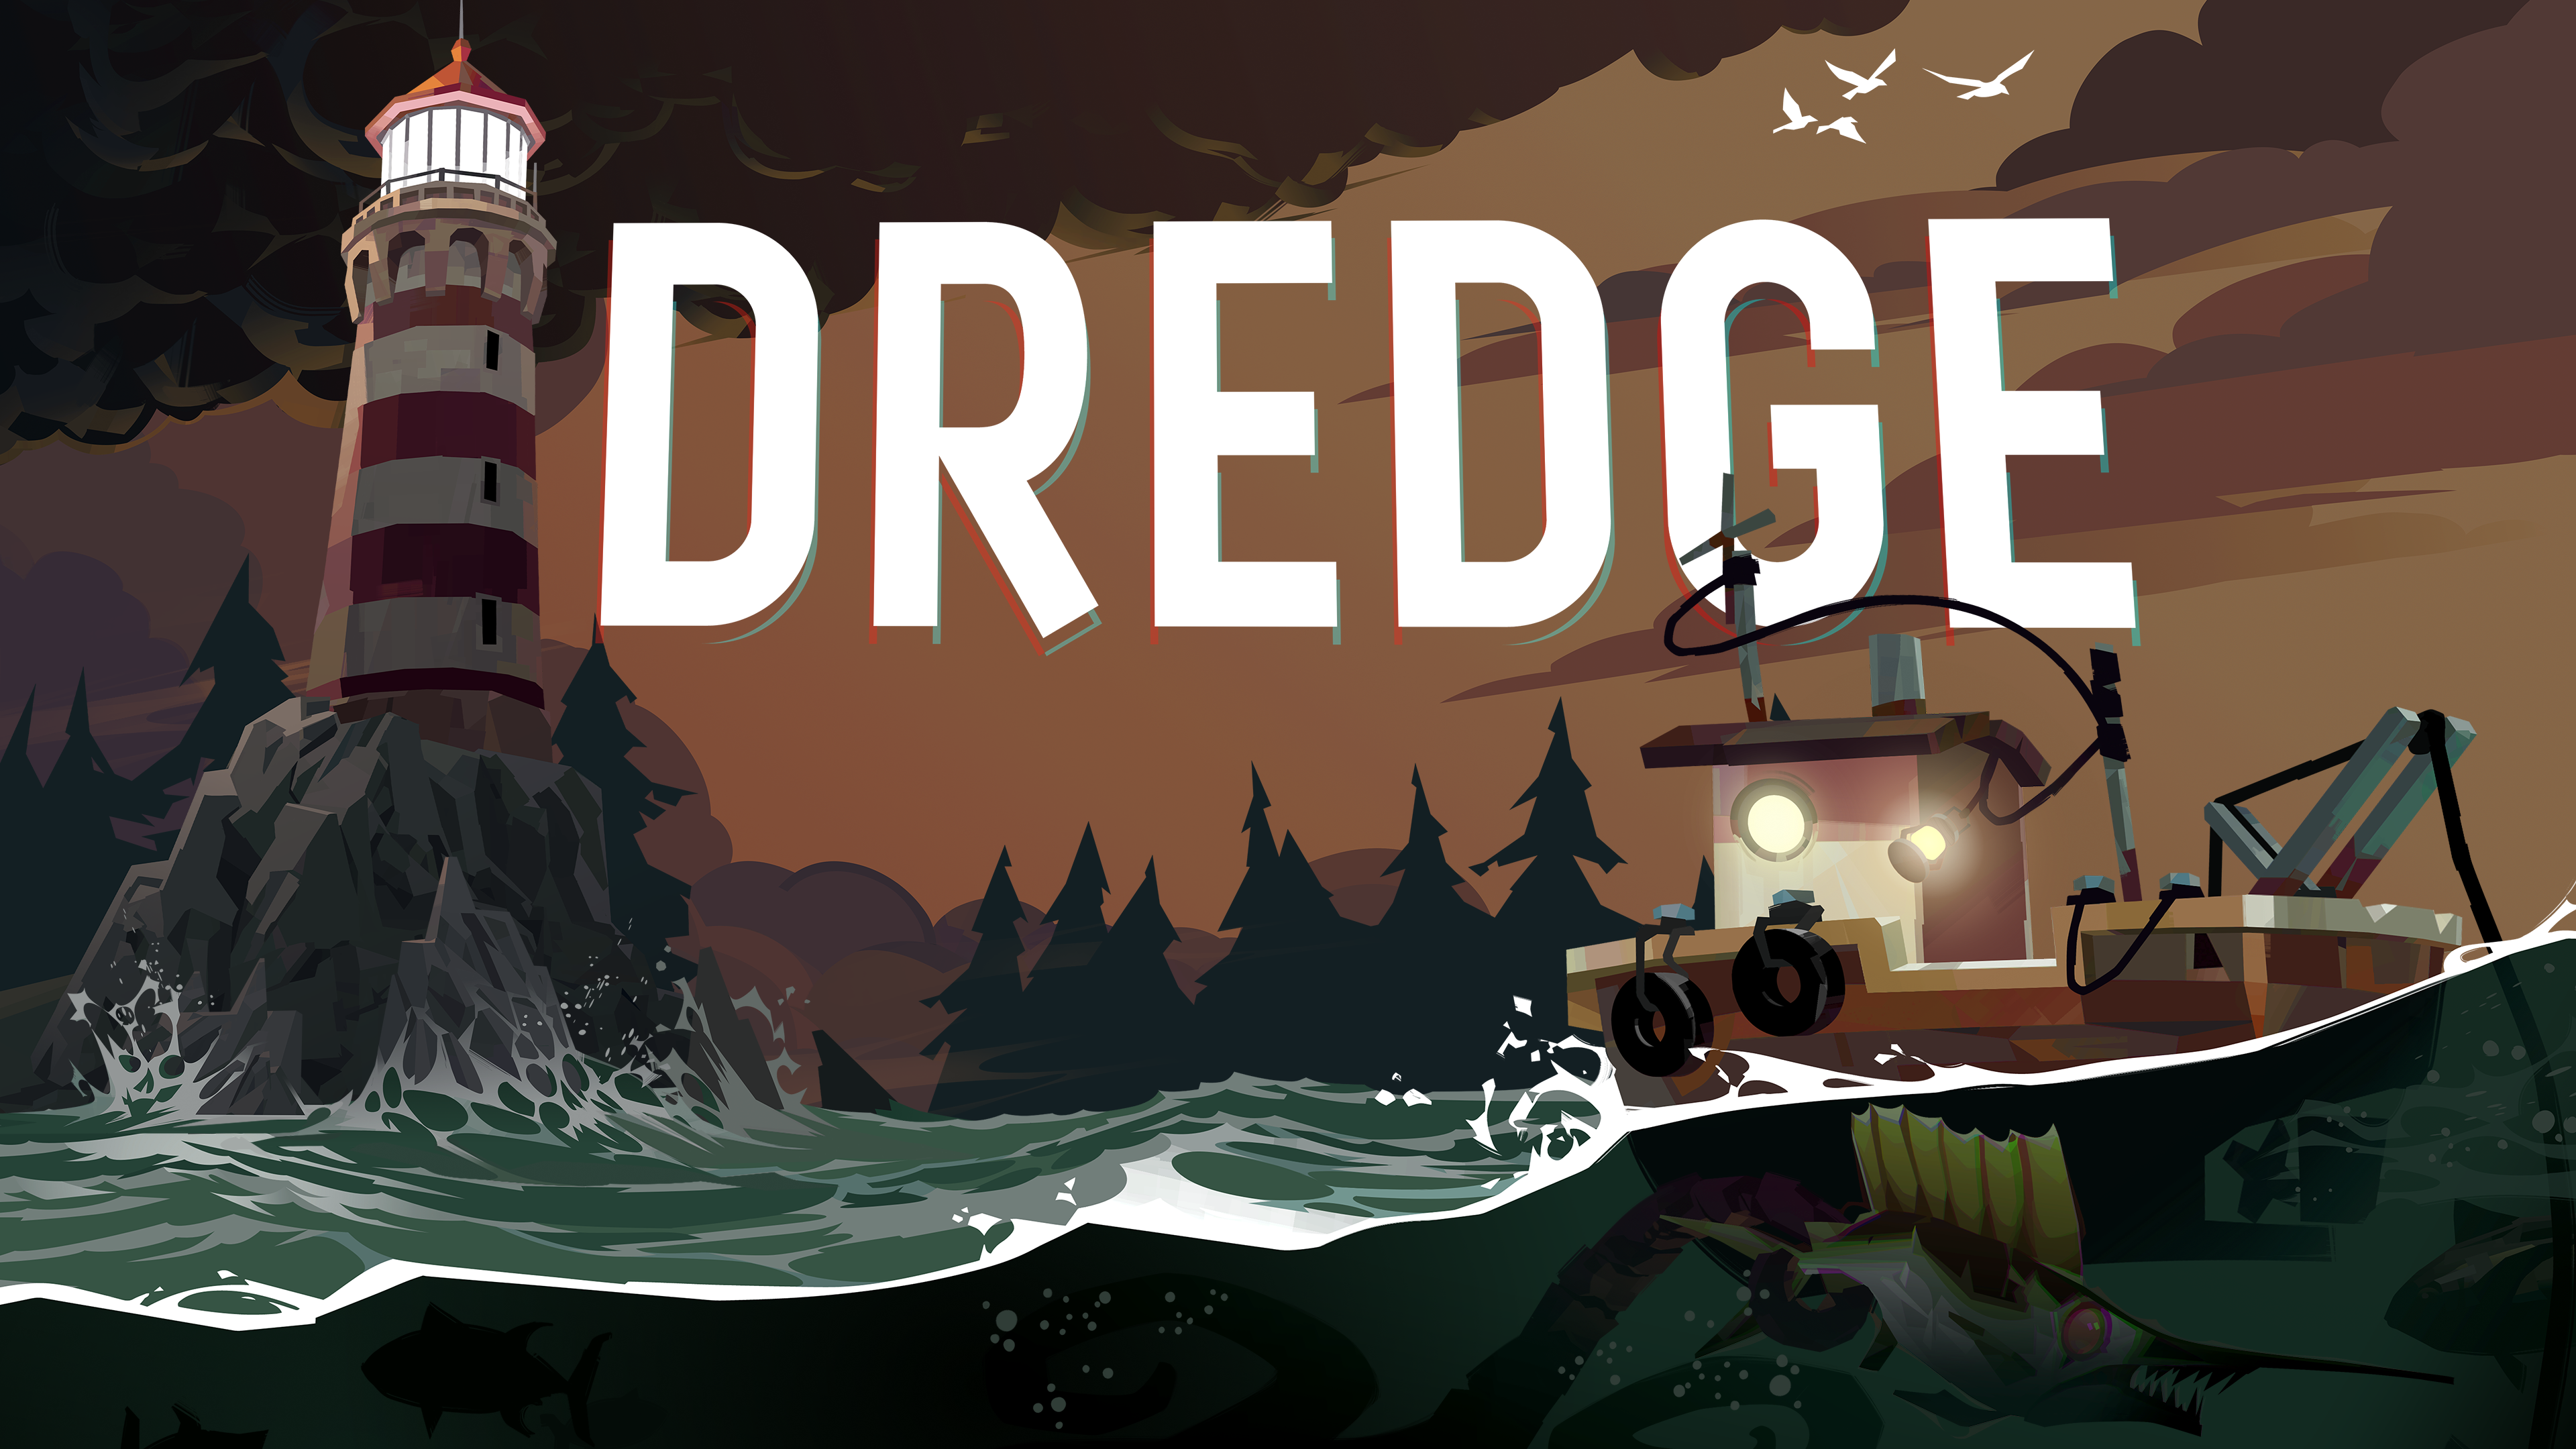 You can now try fishing game Dredge before you buy with this new Switch demo - Eurogamer.net (Picture 4)